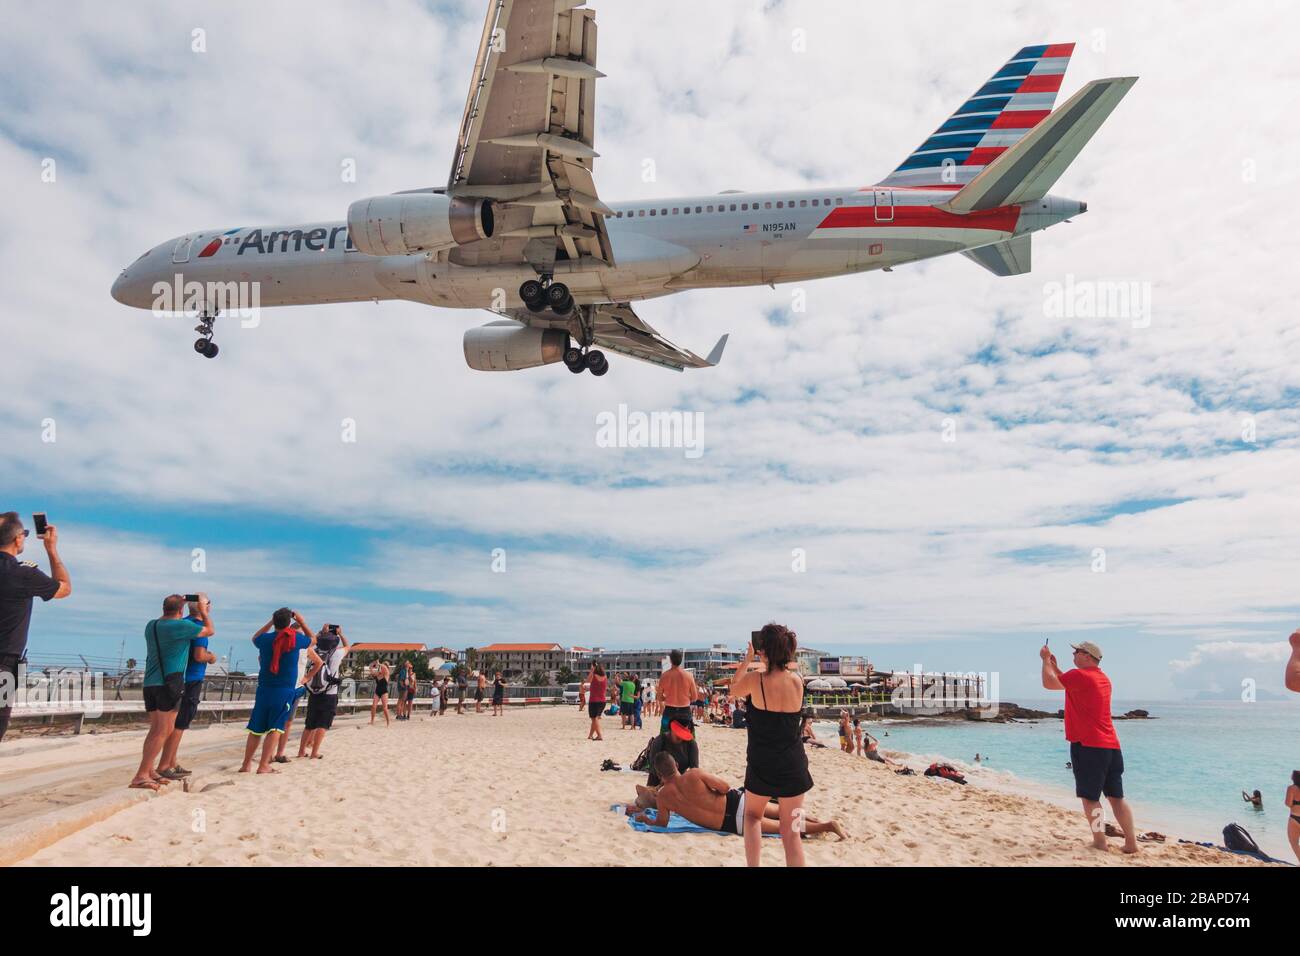 An American Airlines Boeing 757-200 flies low over tourists on Maho Beach, St. Maarten Stock Photo